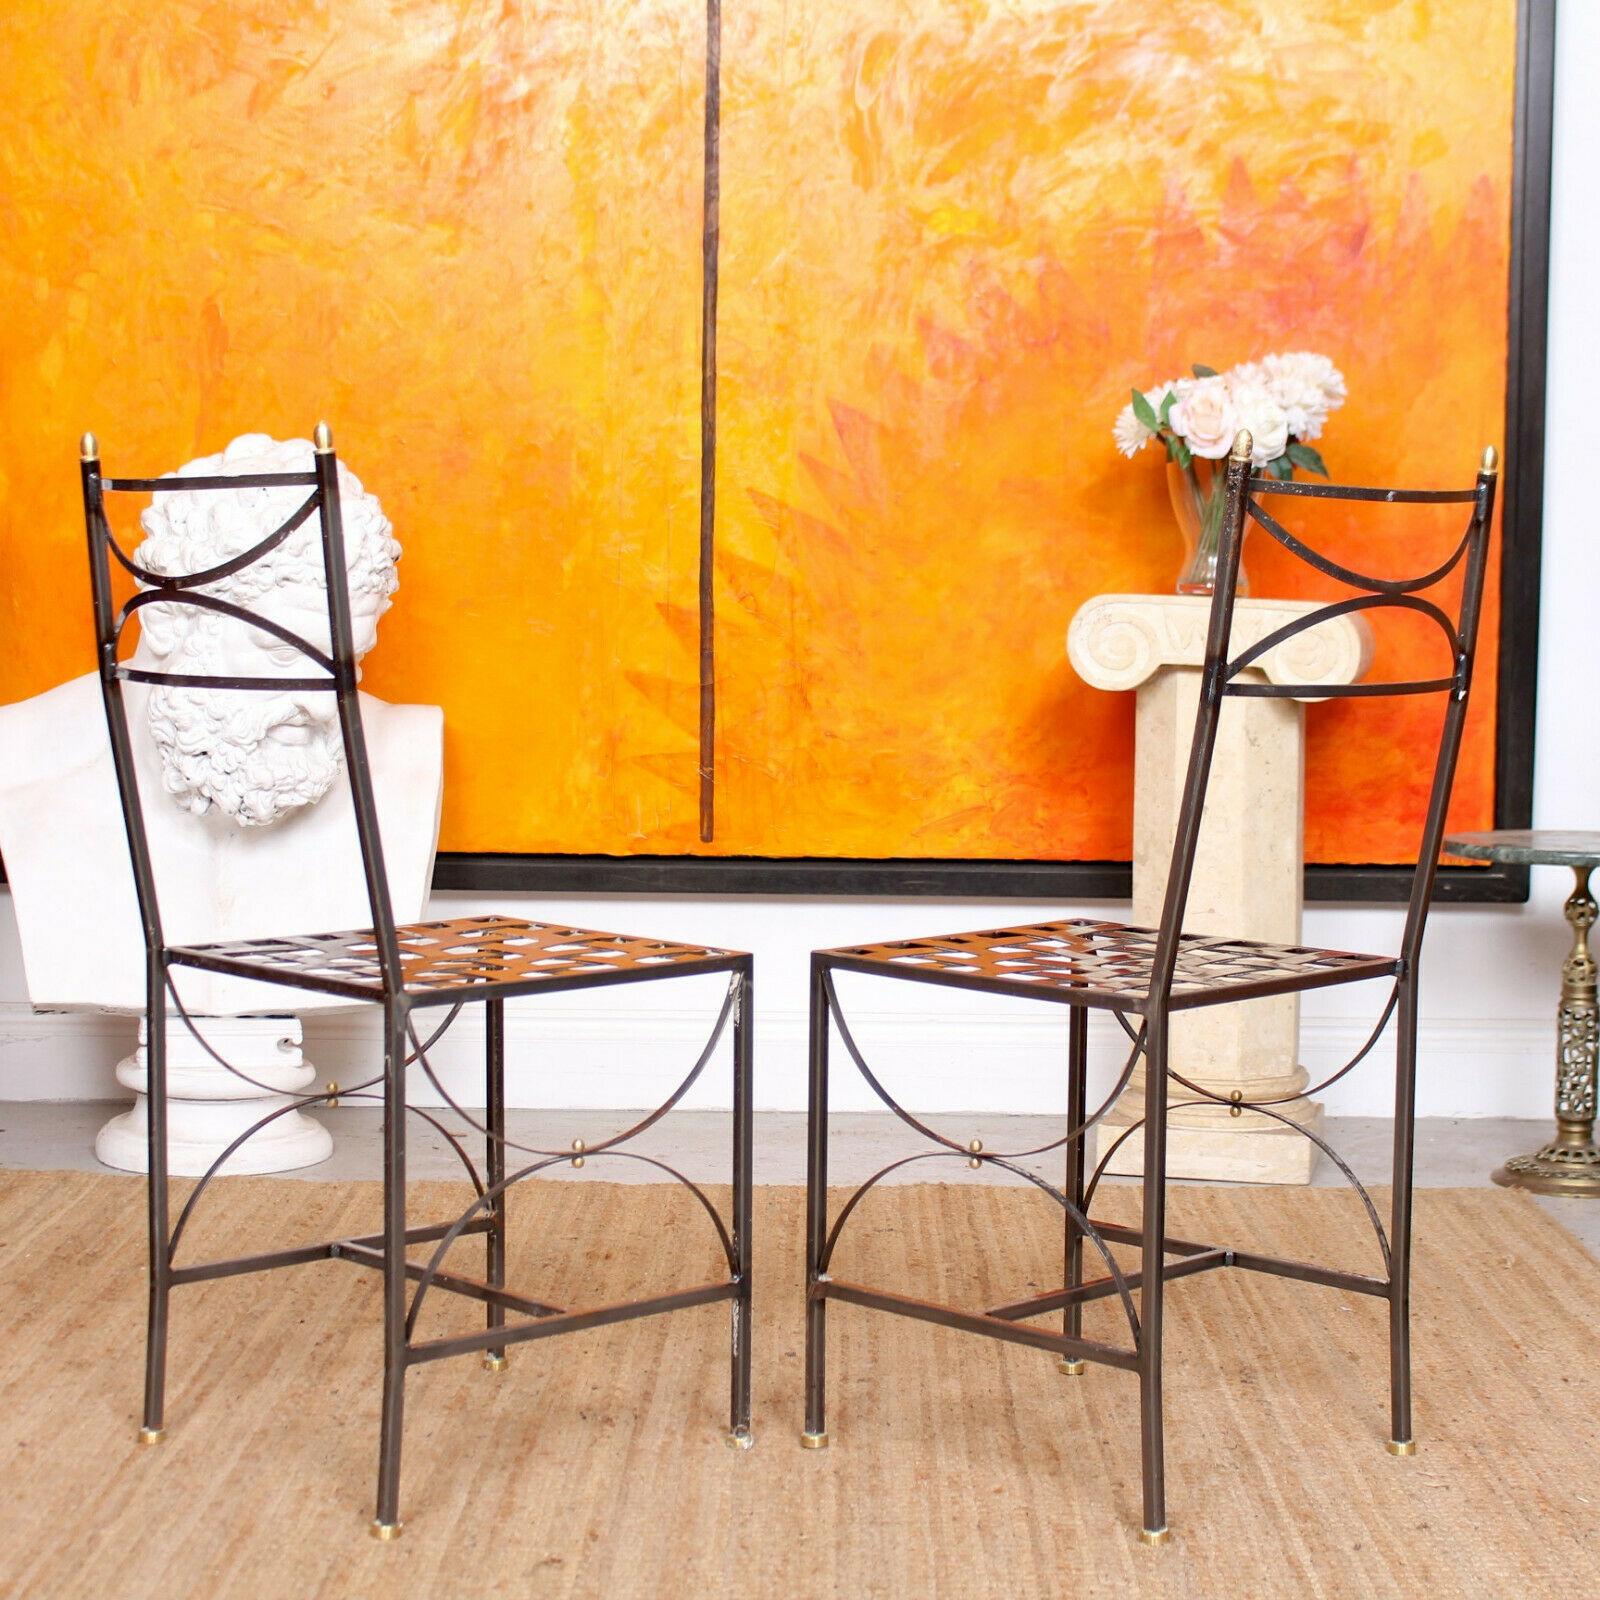 4 Orangery Dining Chairs Industrial Anodized Wrought Steel For Sale 3